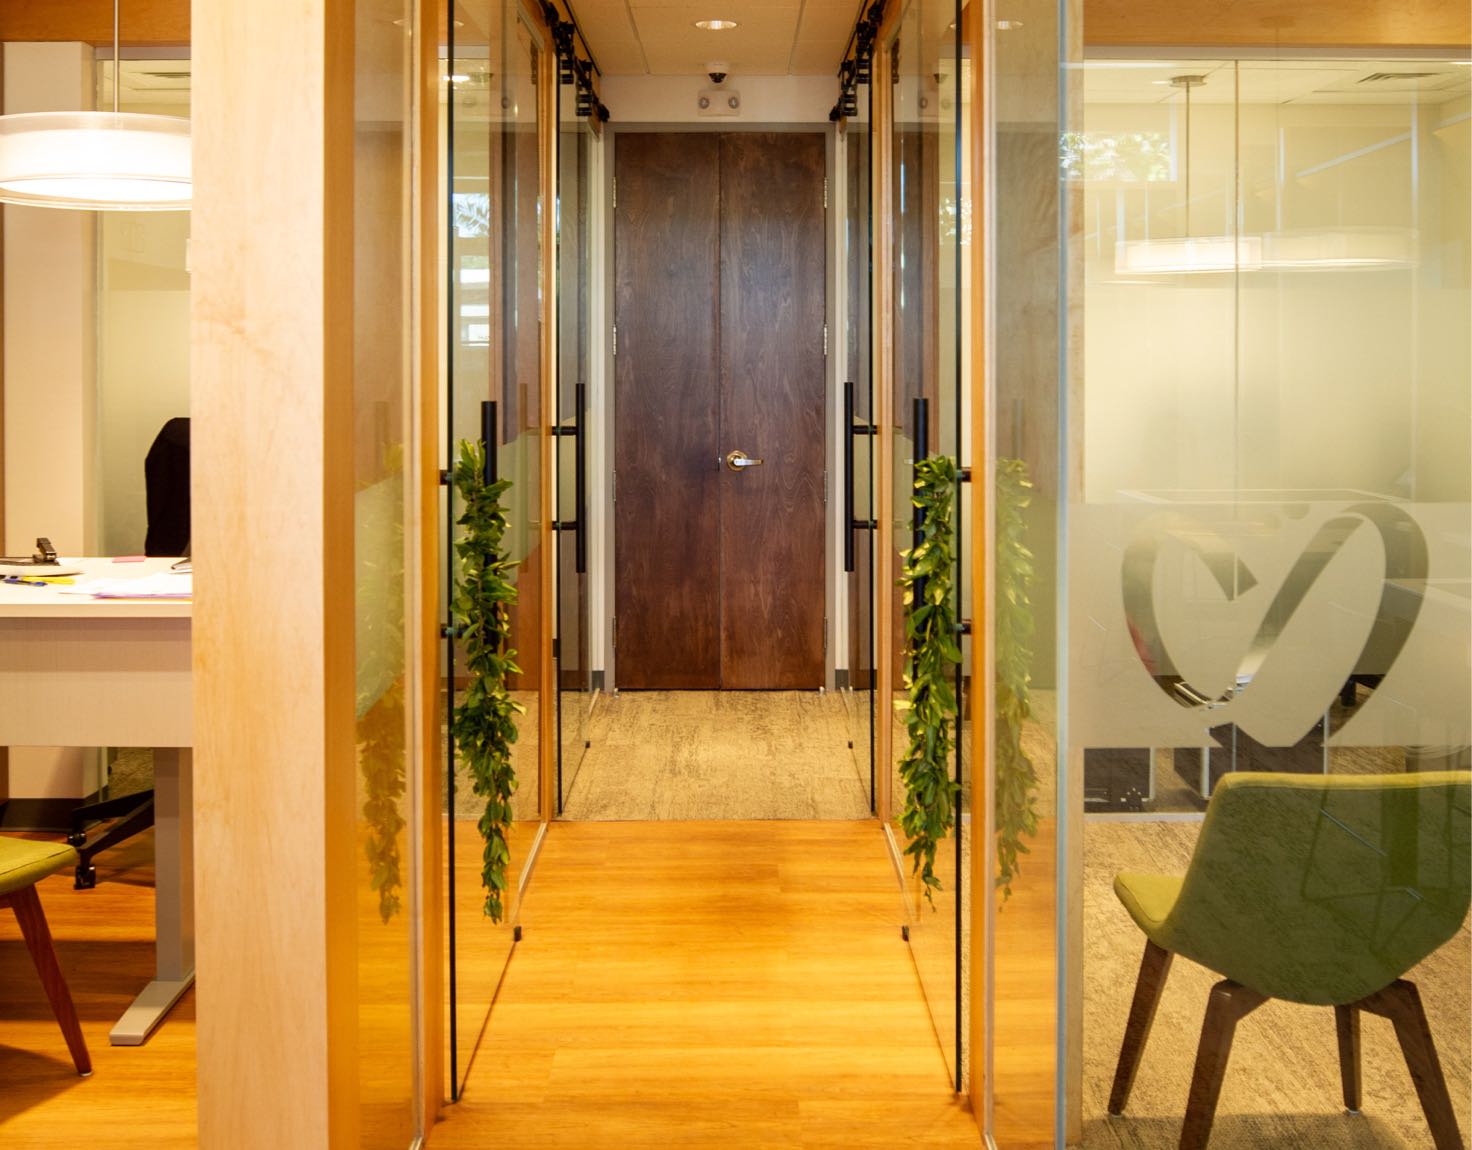 A hallway with glass offices on either side.